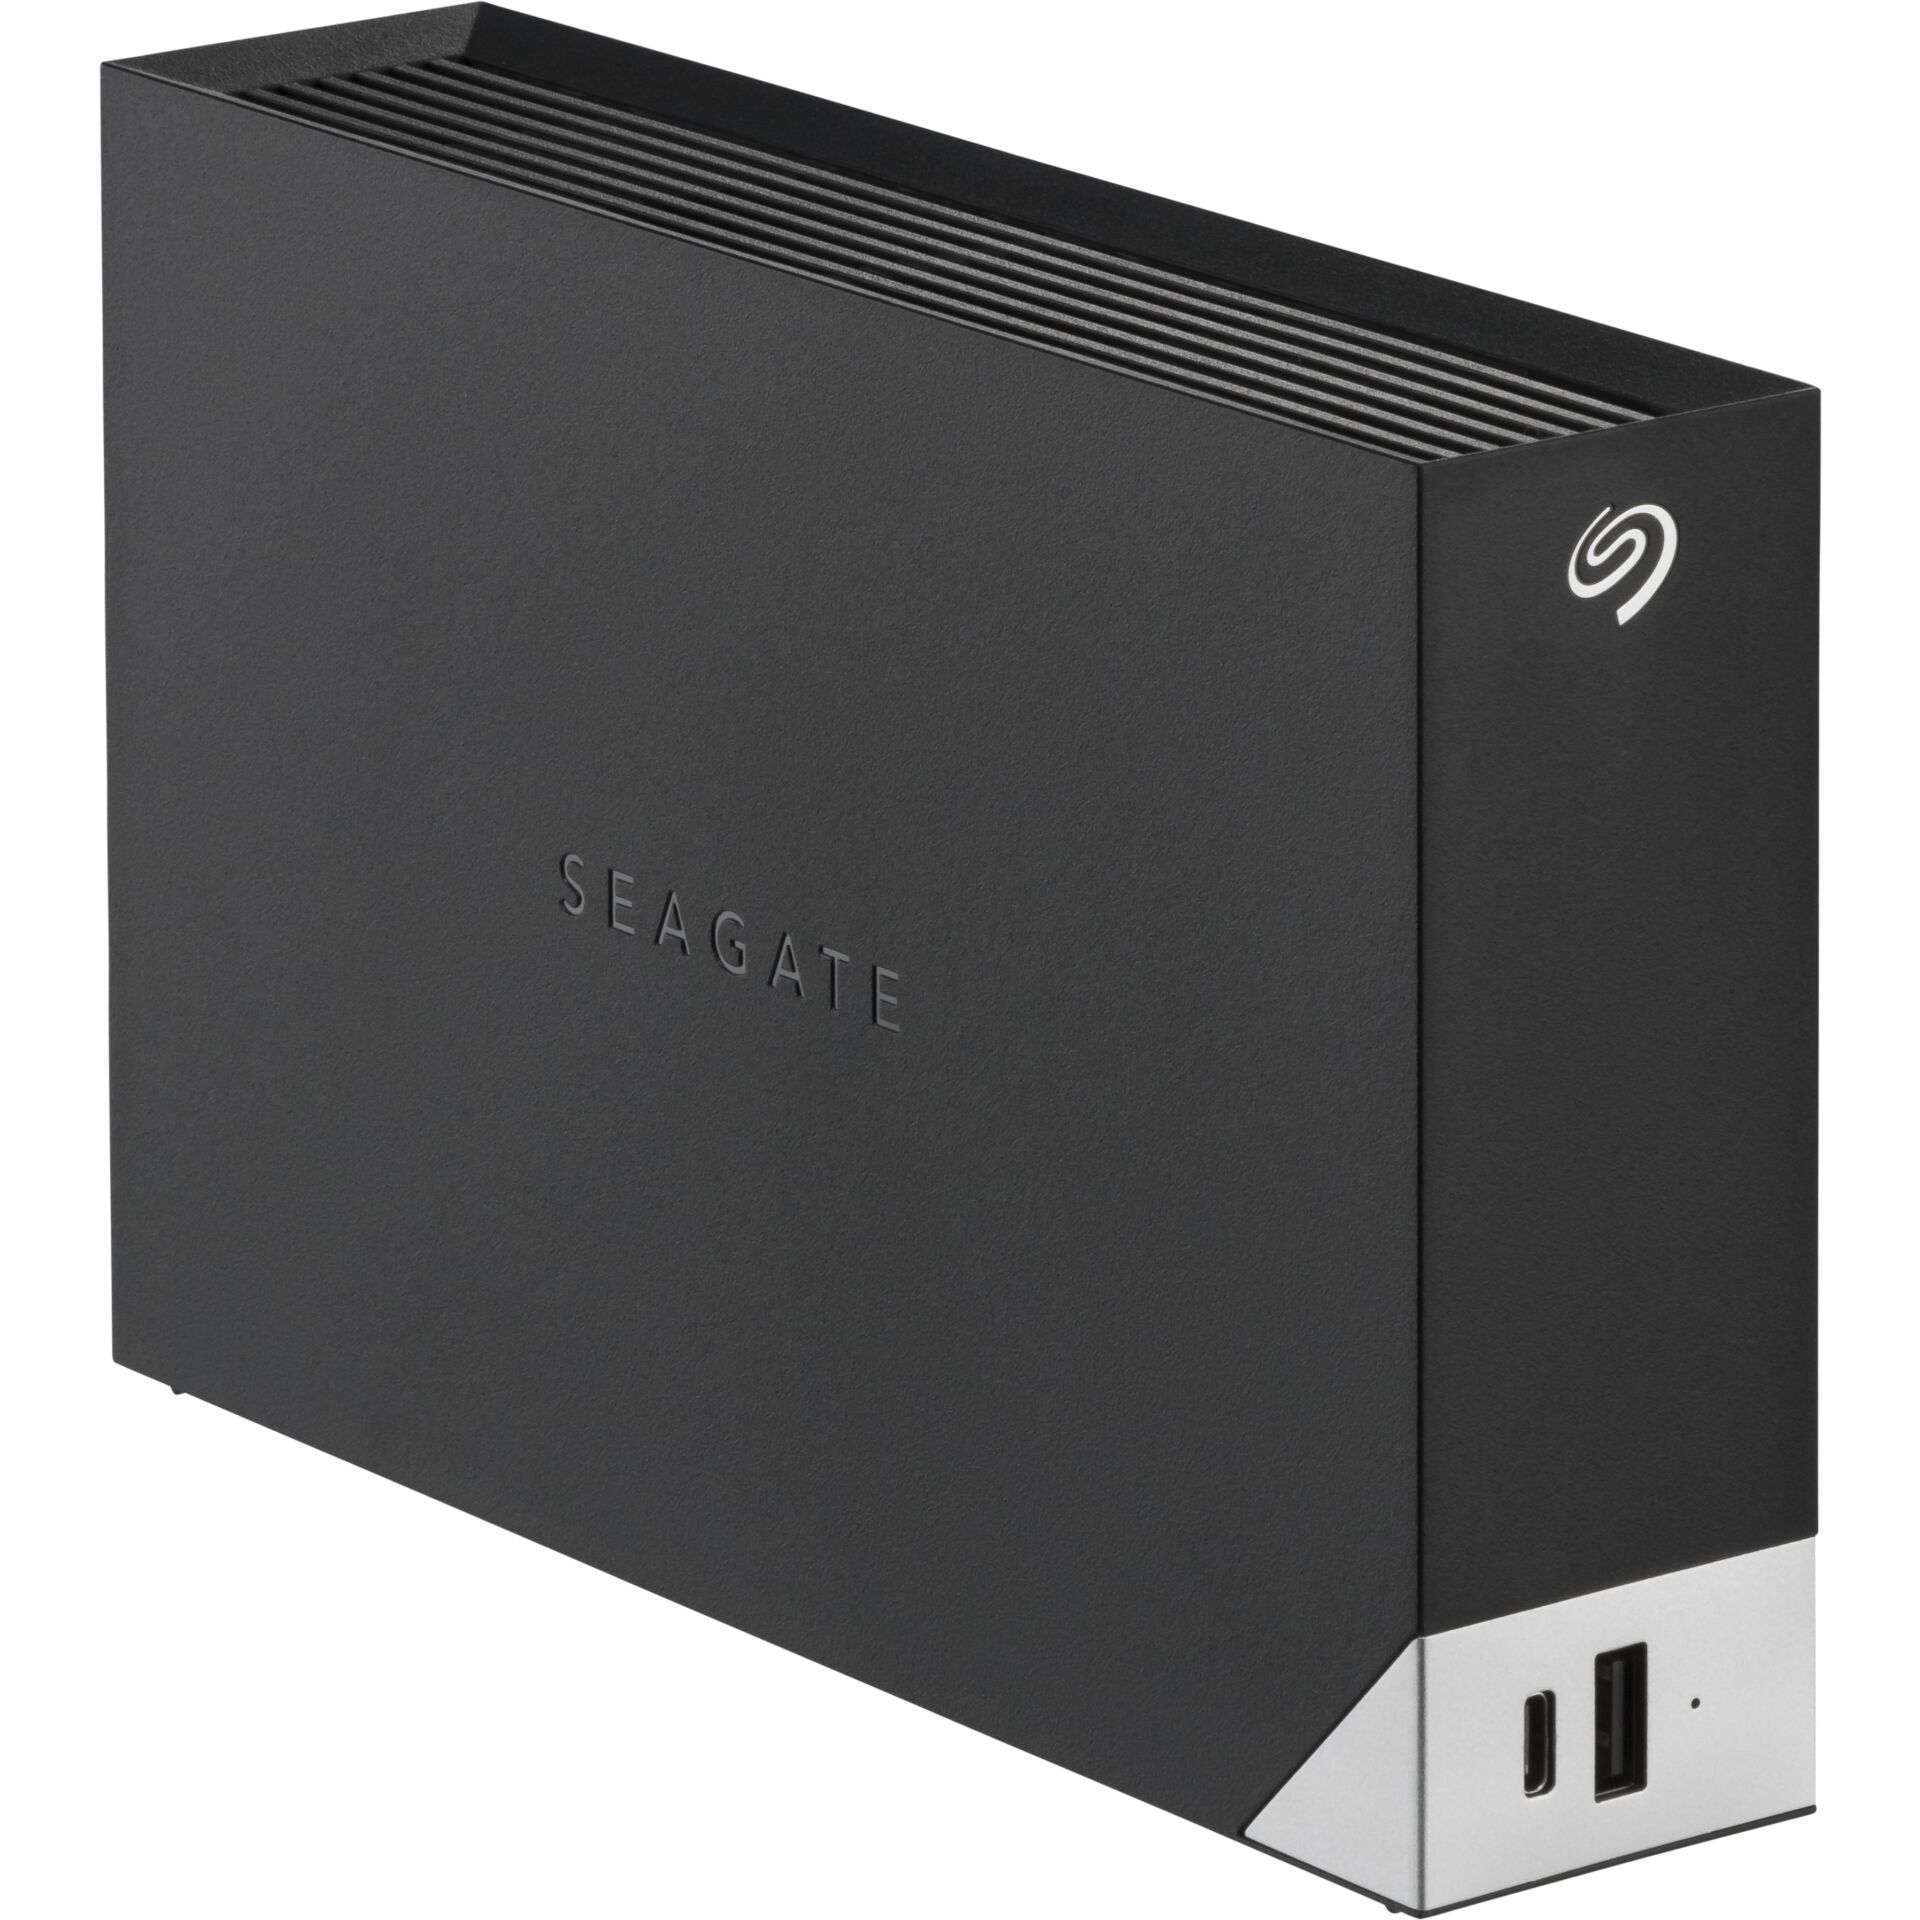 16.0 TB HDD Seagate ONE TOUCH with Hub +Rescue, USB 3.0 Micro-B